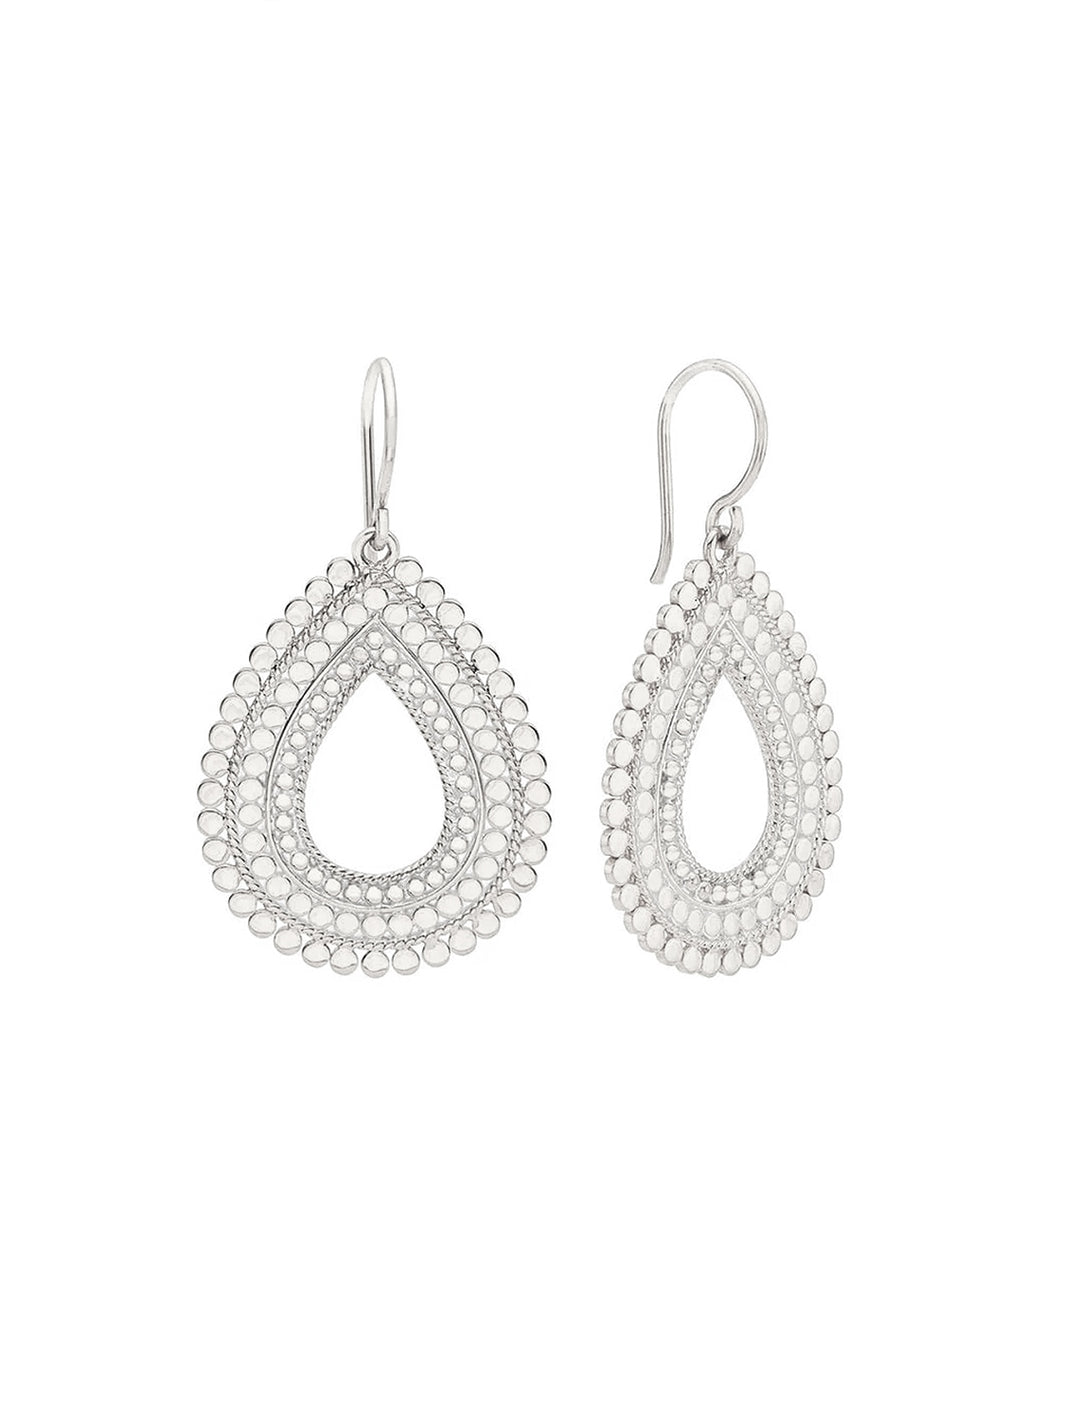 Front view of Anna Beck's large scalloped open drop earrings in silver.